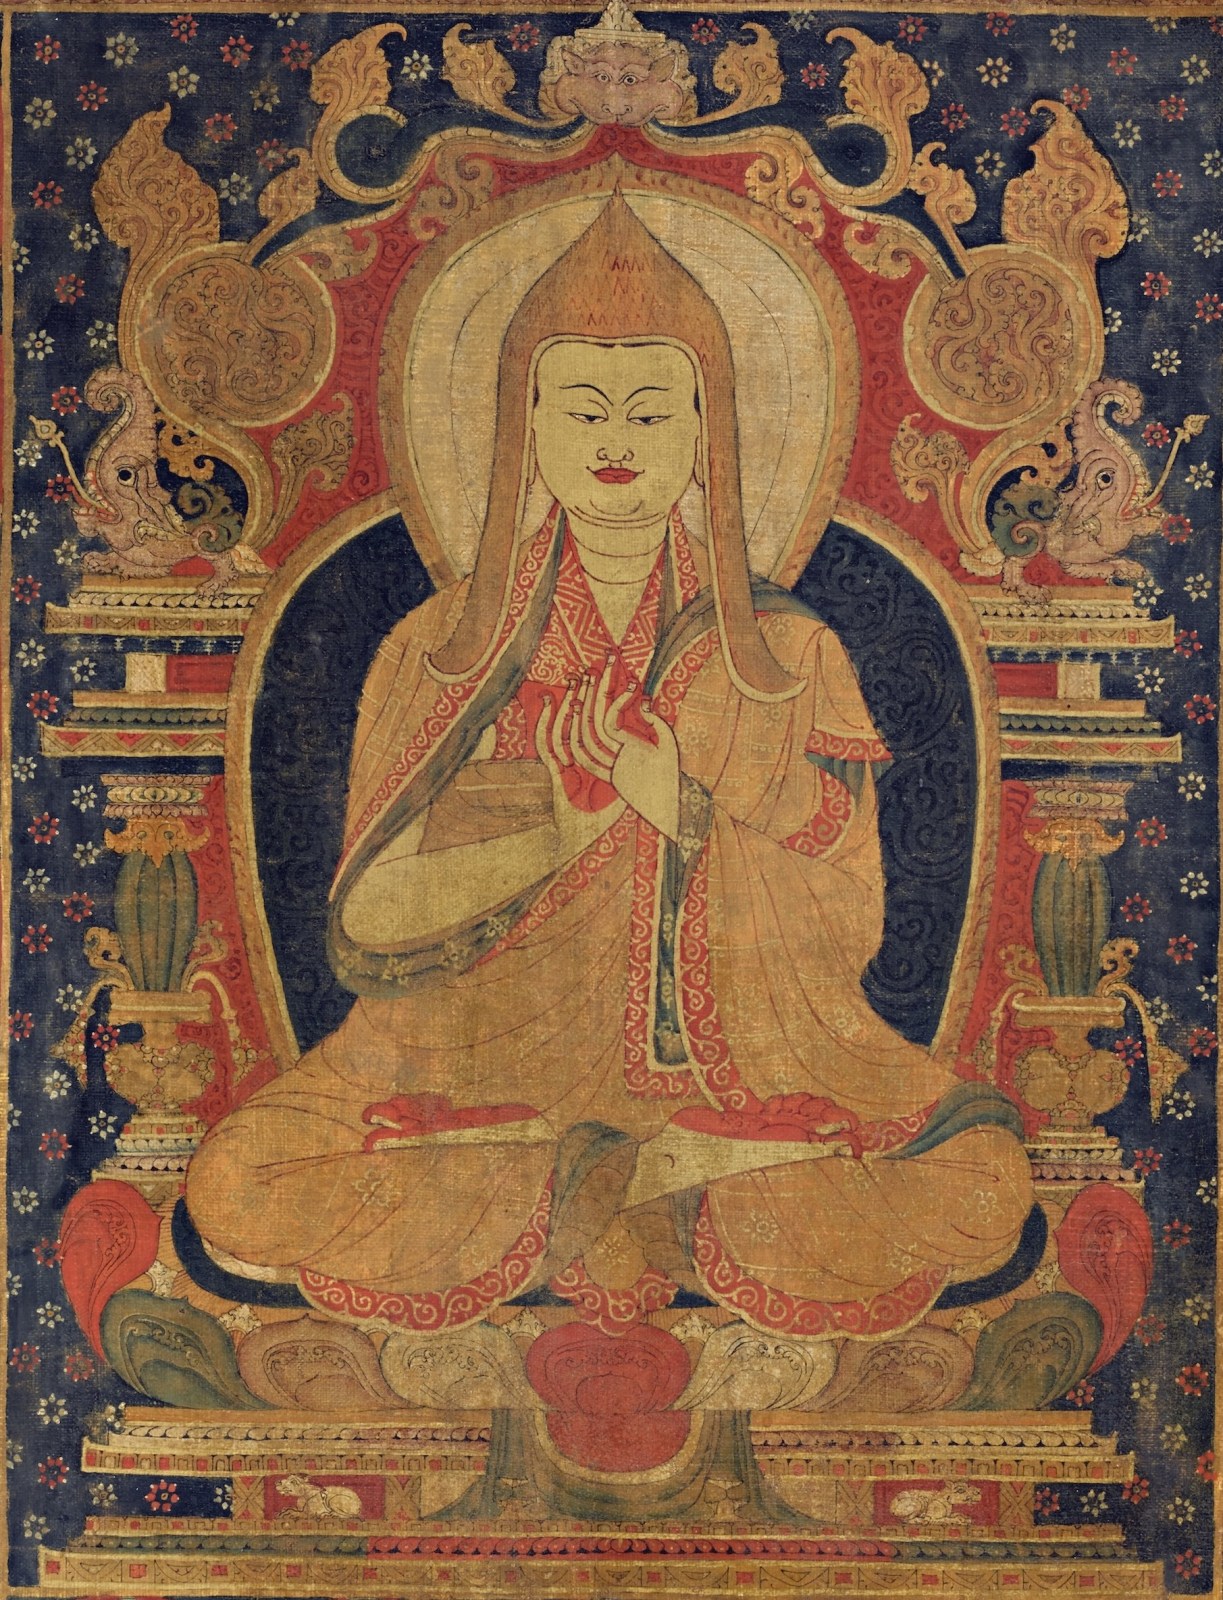 Detail of Buddhist Hierarch painting showing him seated on a lotus throne